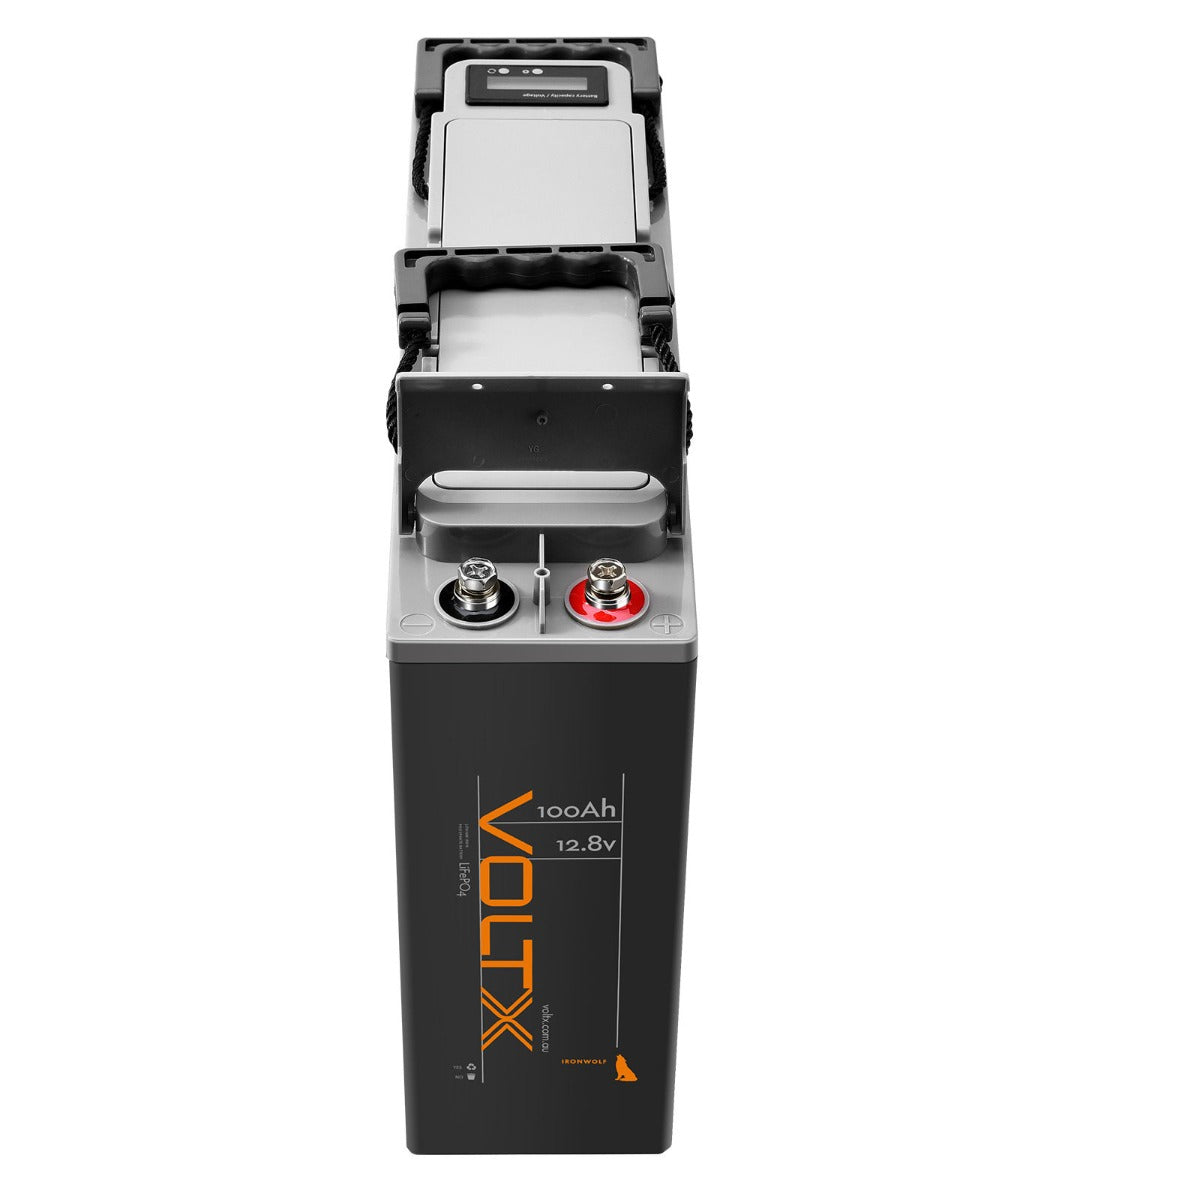 BUNDLE DEAL - VoltX 2x 100Ah Lithium Battery LiFePO4 Rechargeable RV with Parallel Cables